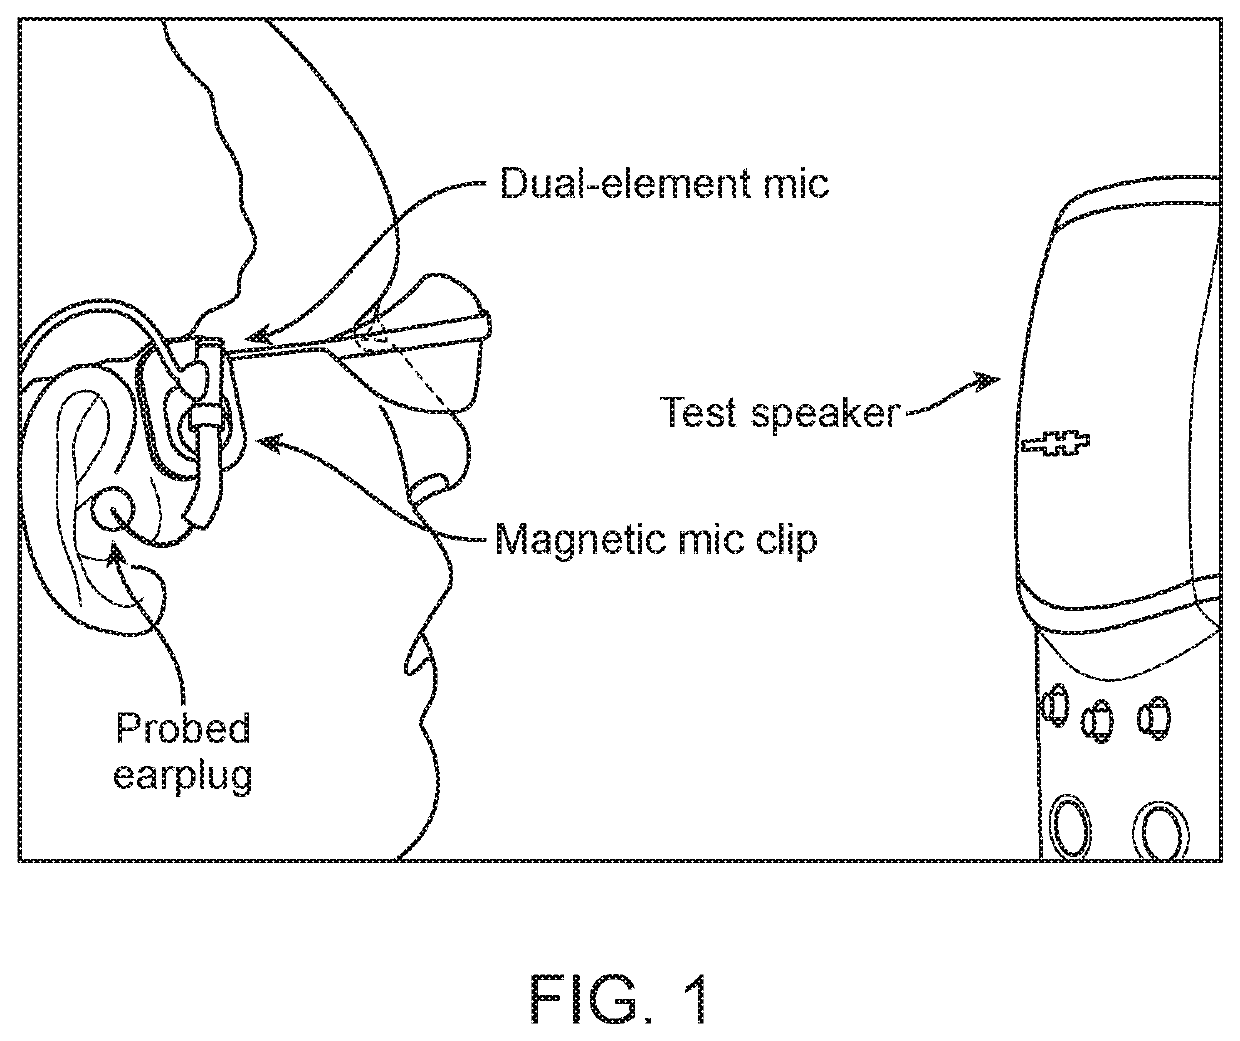 Hearing protection and noise recording systems and methods